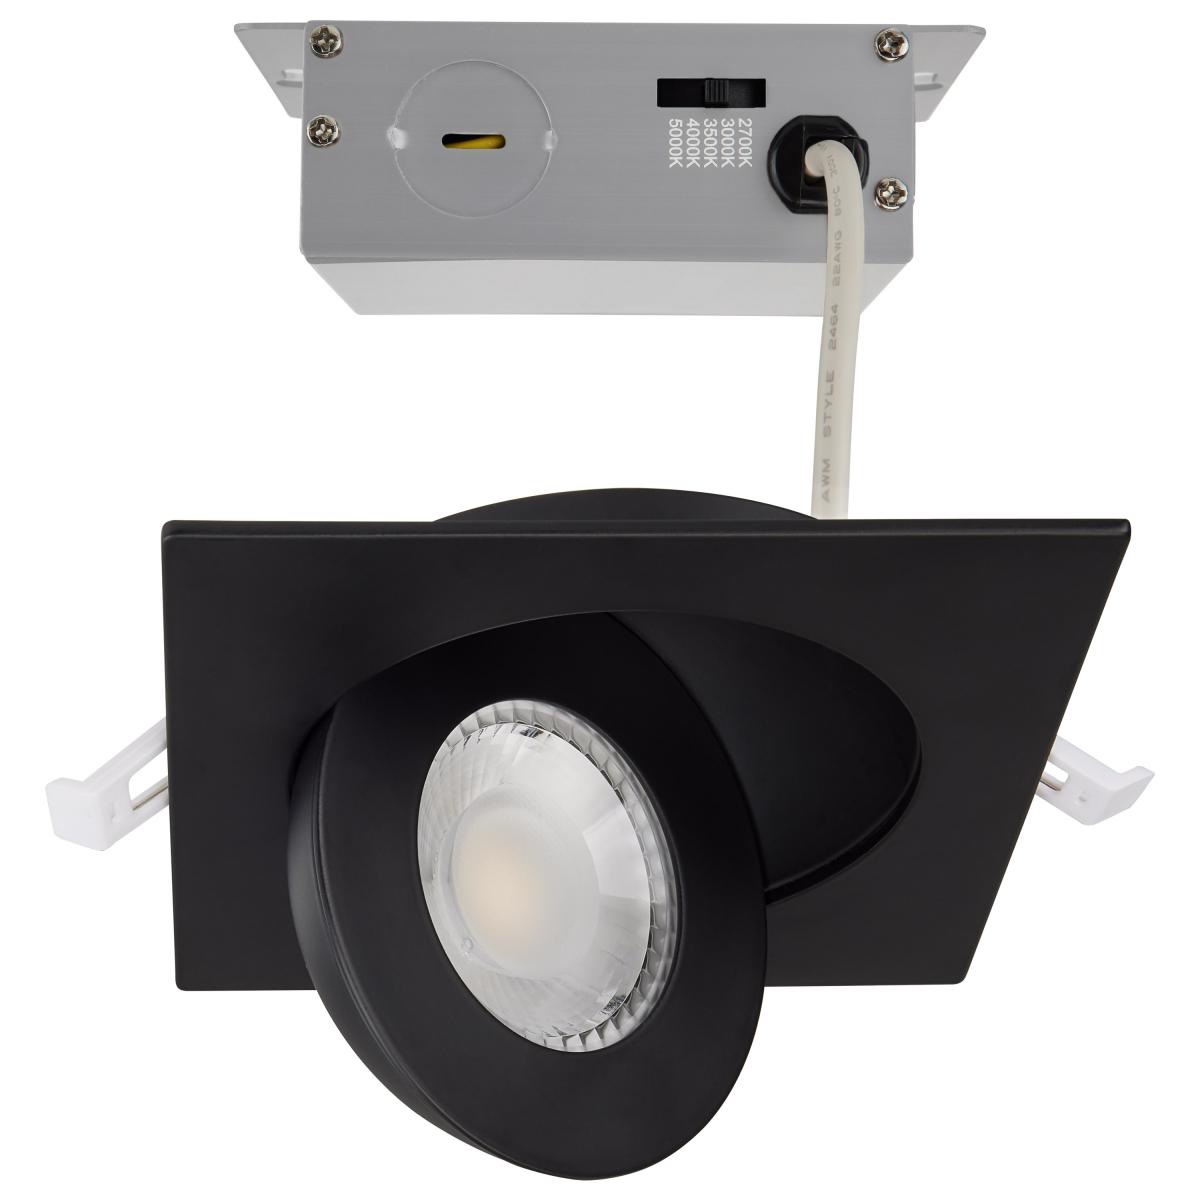 4 Inch Square LED Gimbaled Downlight - 9W - 750 Lumens - 120V - Color Temperature Selectable 27K/30K/35K/40K/50K - Black Finish - No Recess Can Required